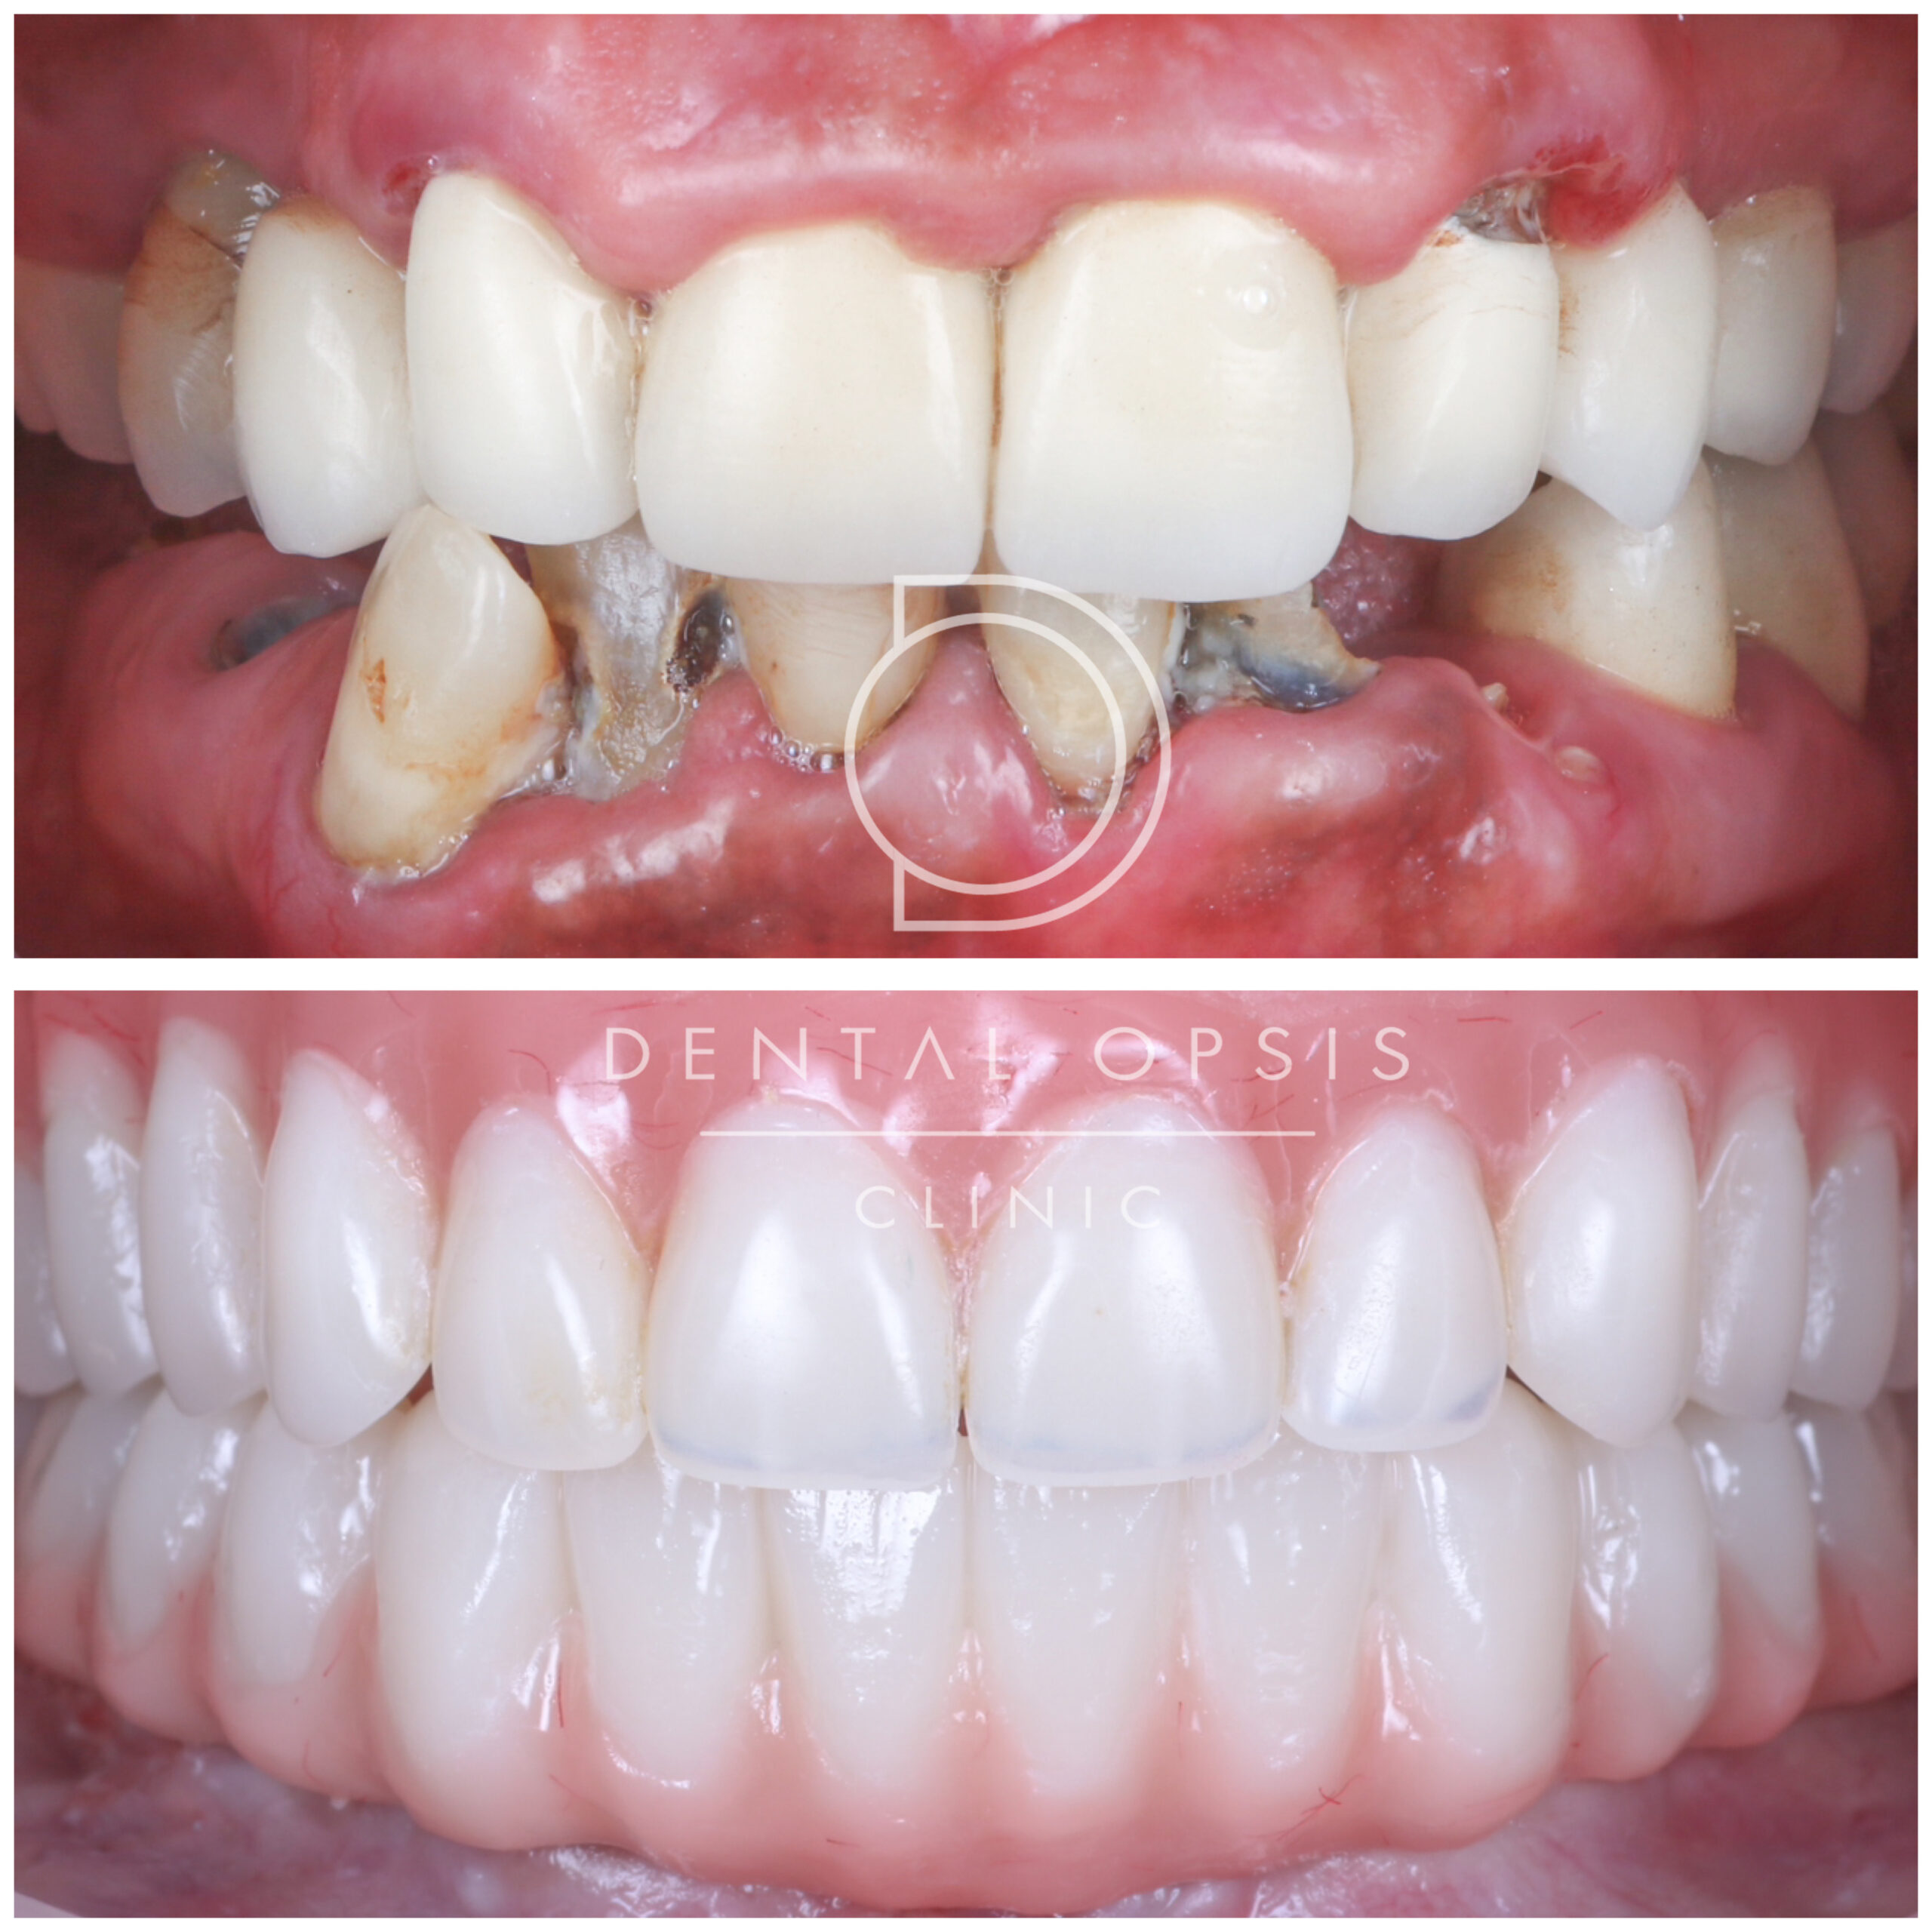 Case with Implants / Full Mouth Reconstruction